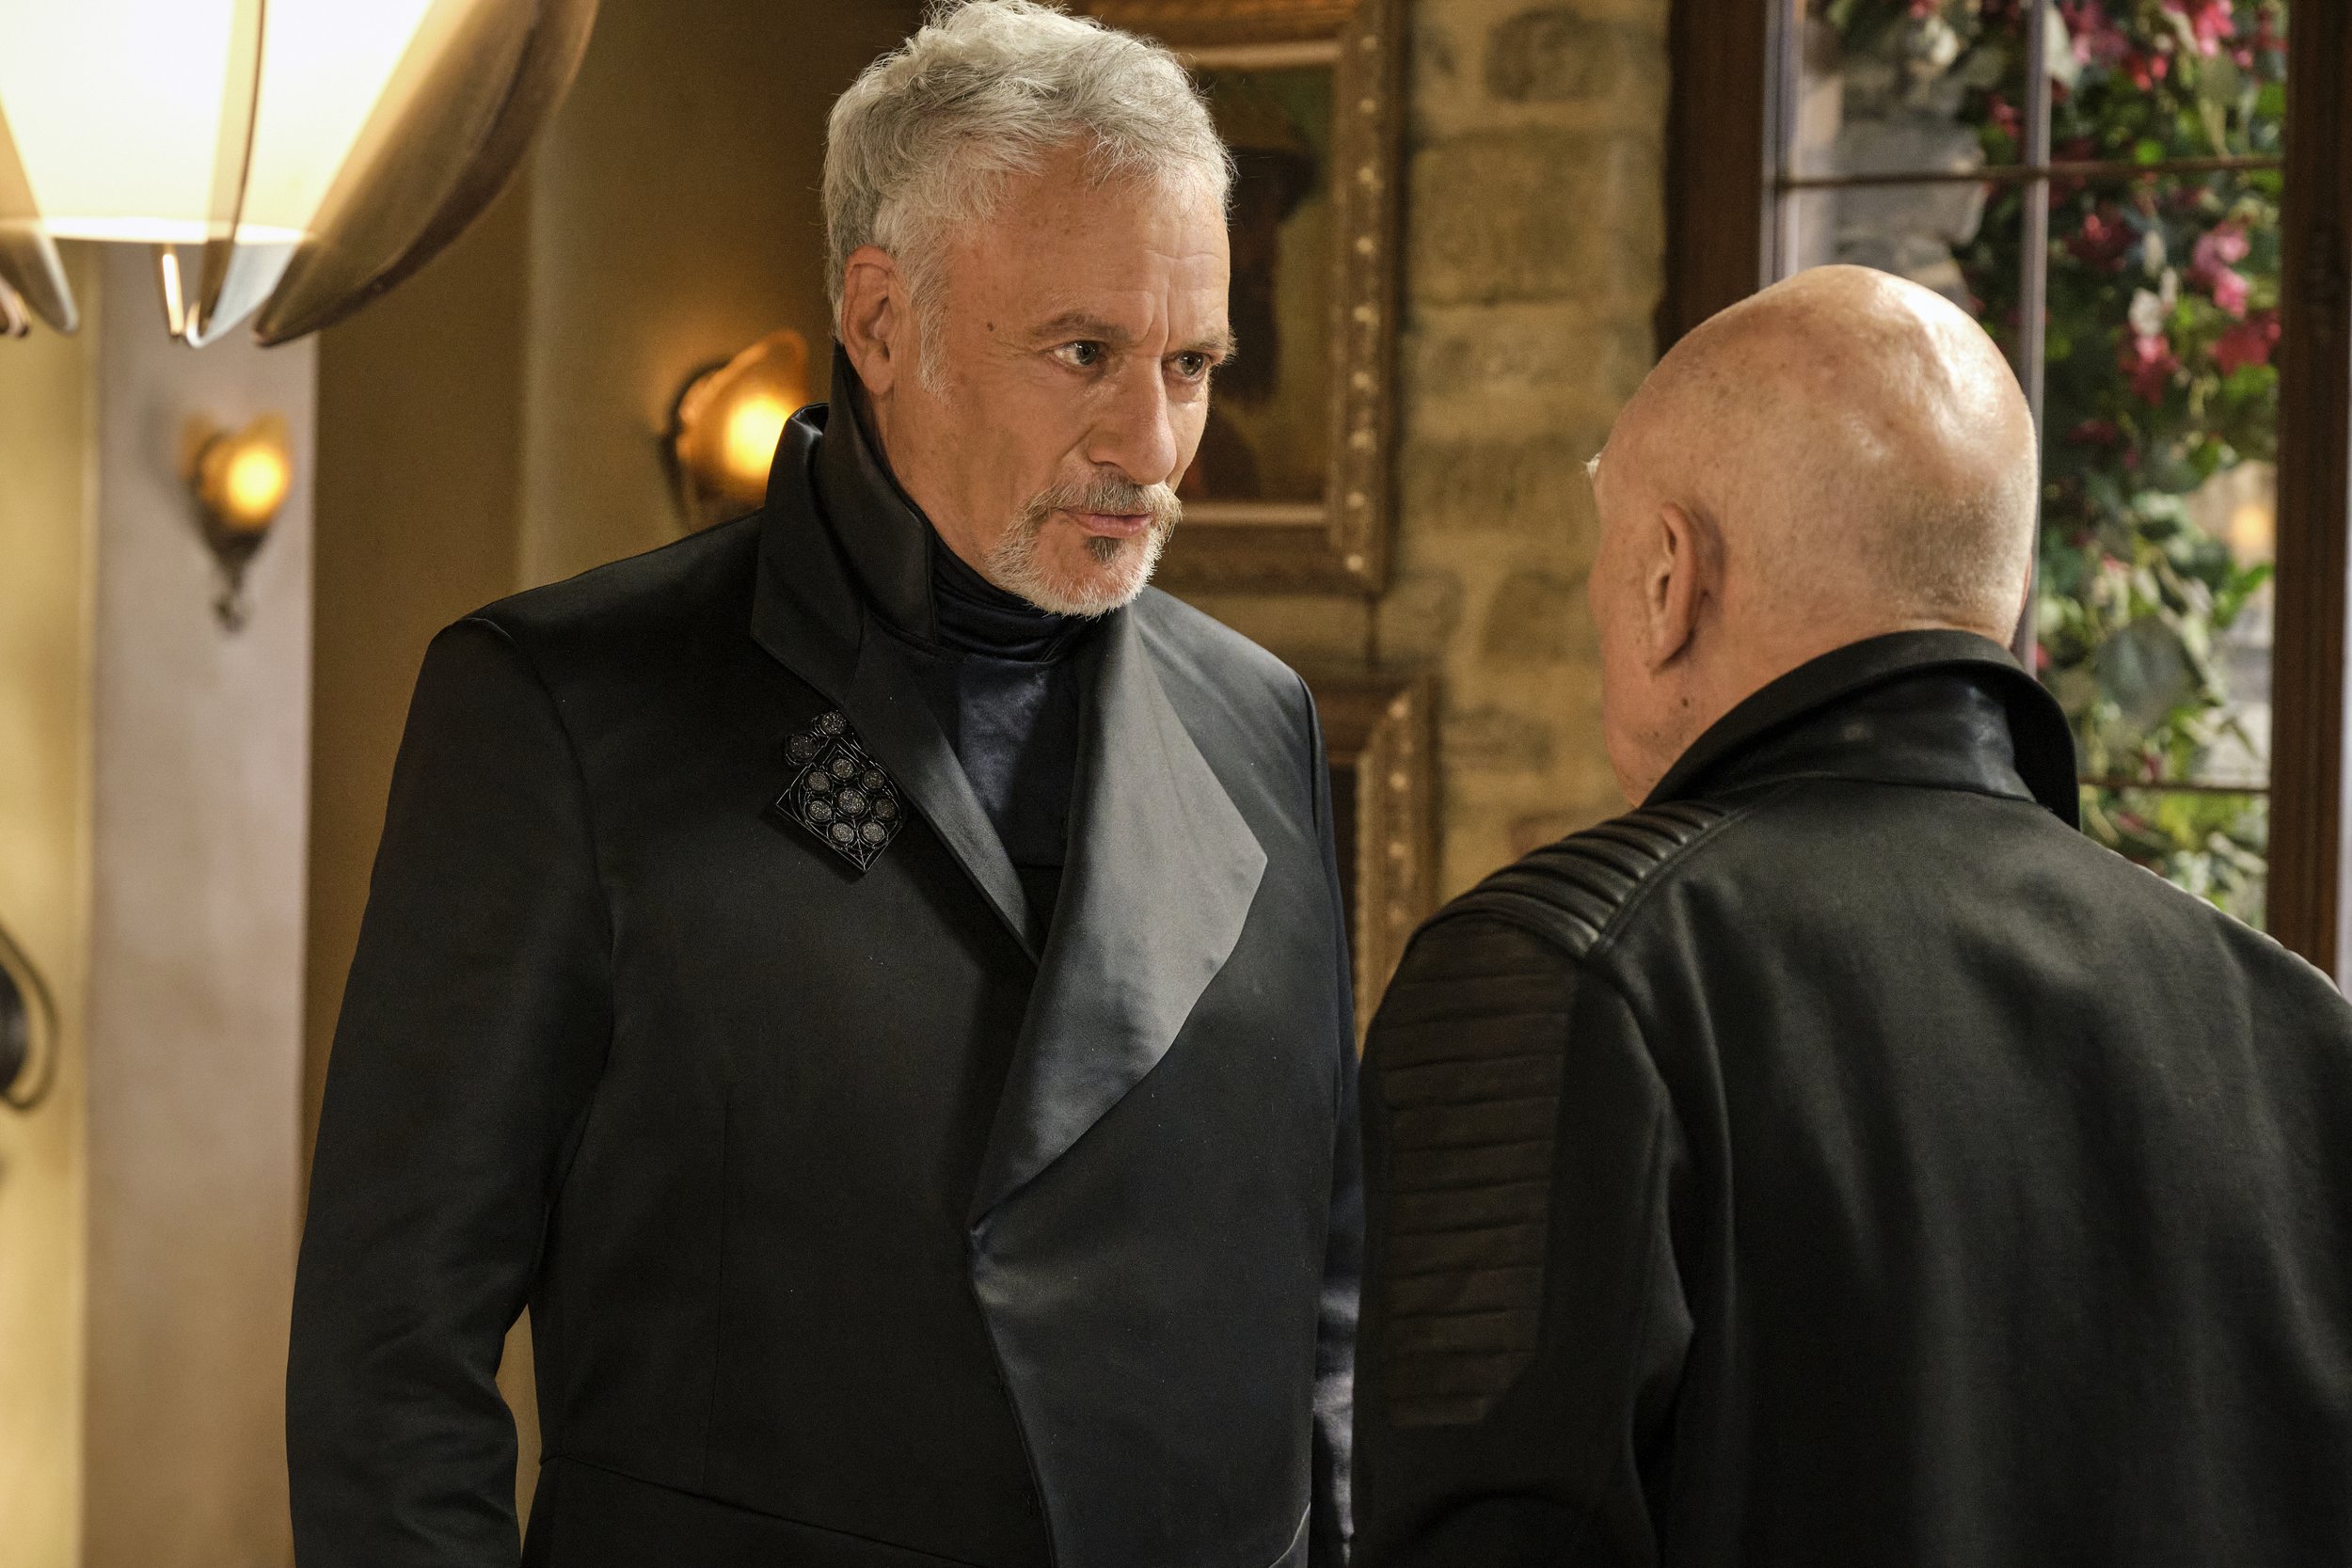   Pictured: John de Lancie as Q and Sir Patrick Stewart as Jean-Luc Picard of the Paramount+ original series STAR TREK: PICARD. Photo Cr: Trae Patton/Paramount+ (C)2022 ViacomCBS. All Rights Reserved.  